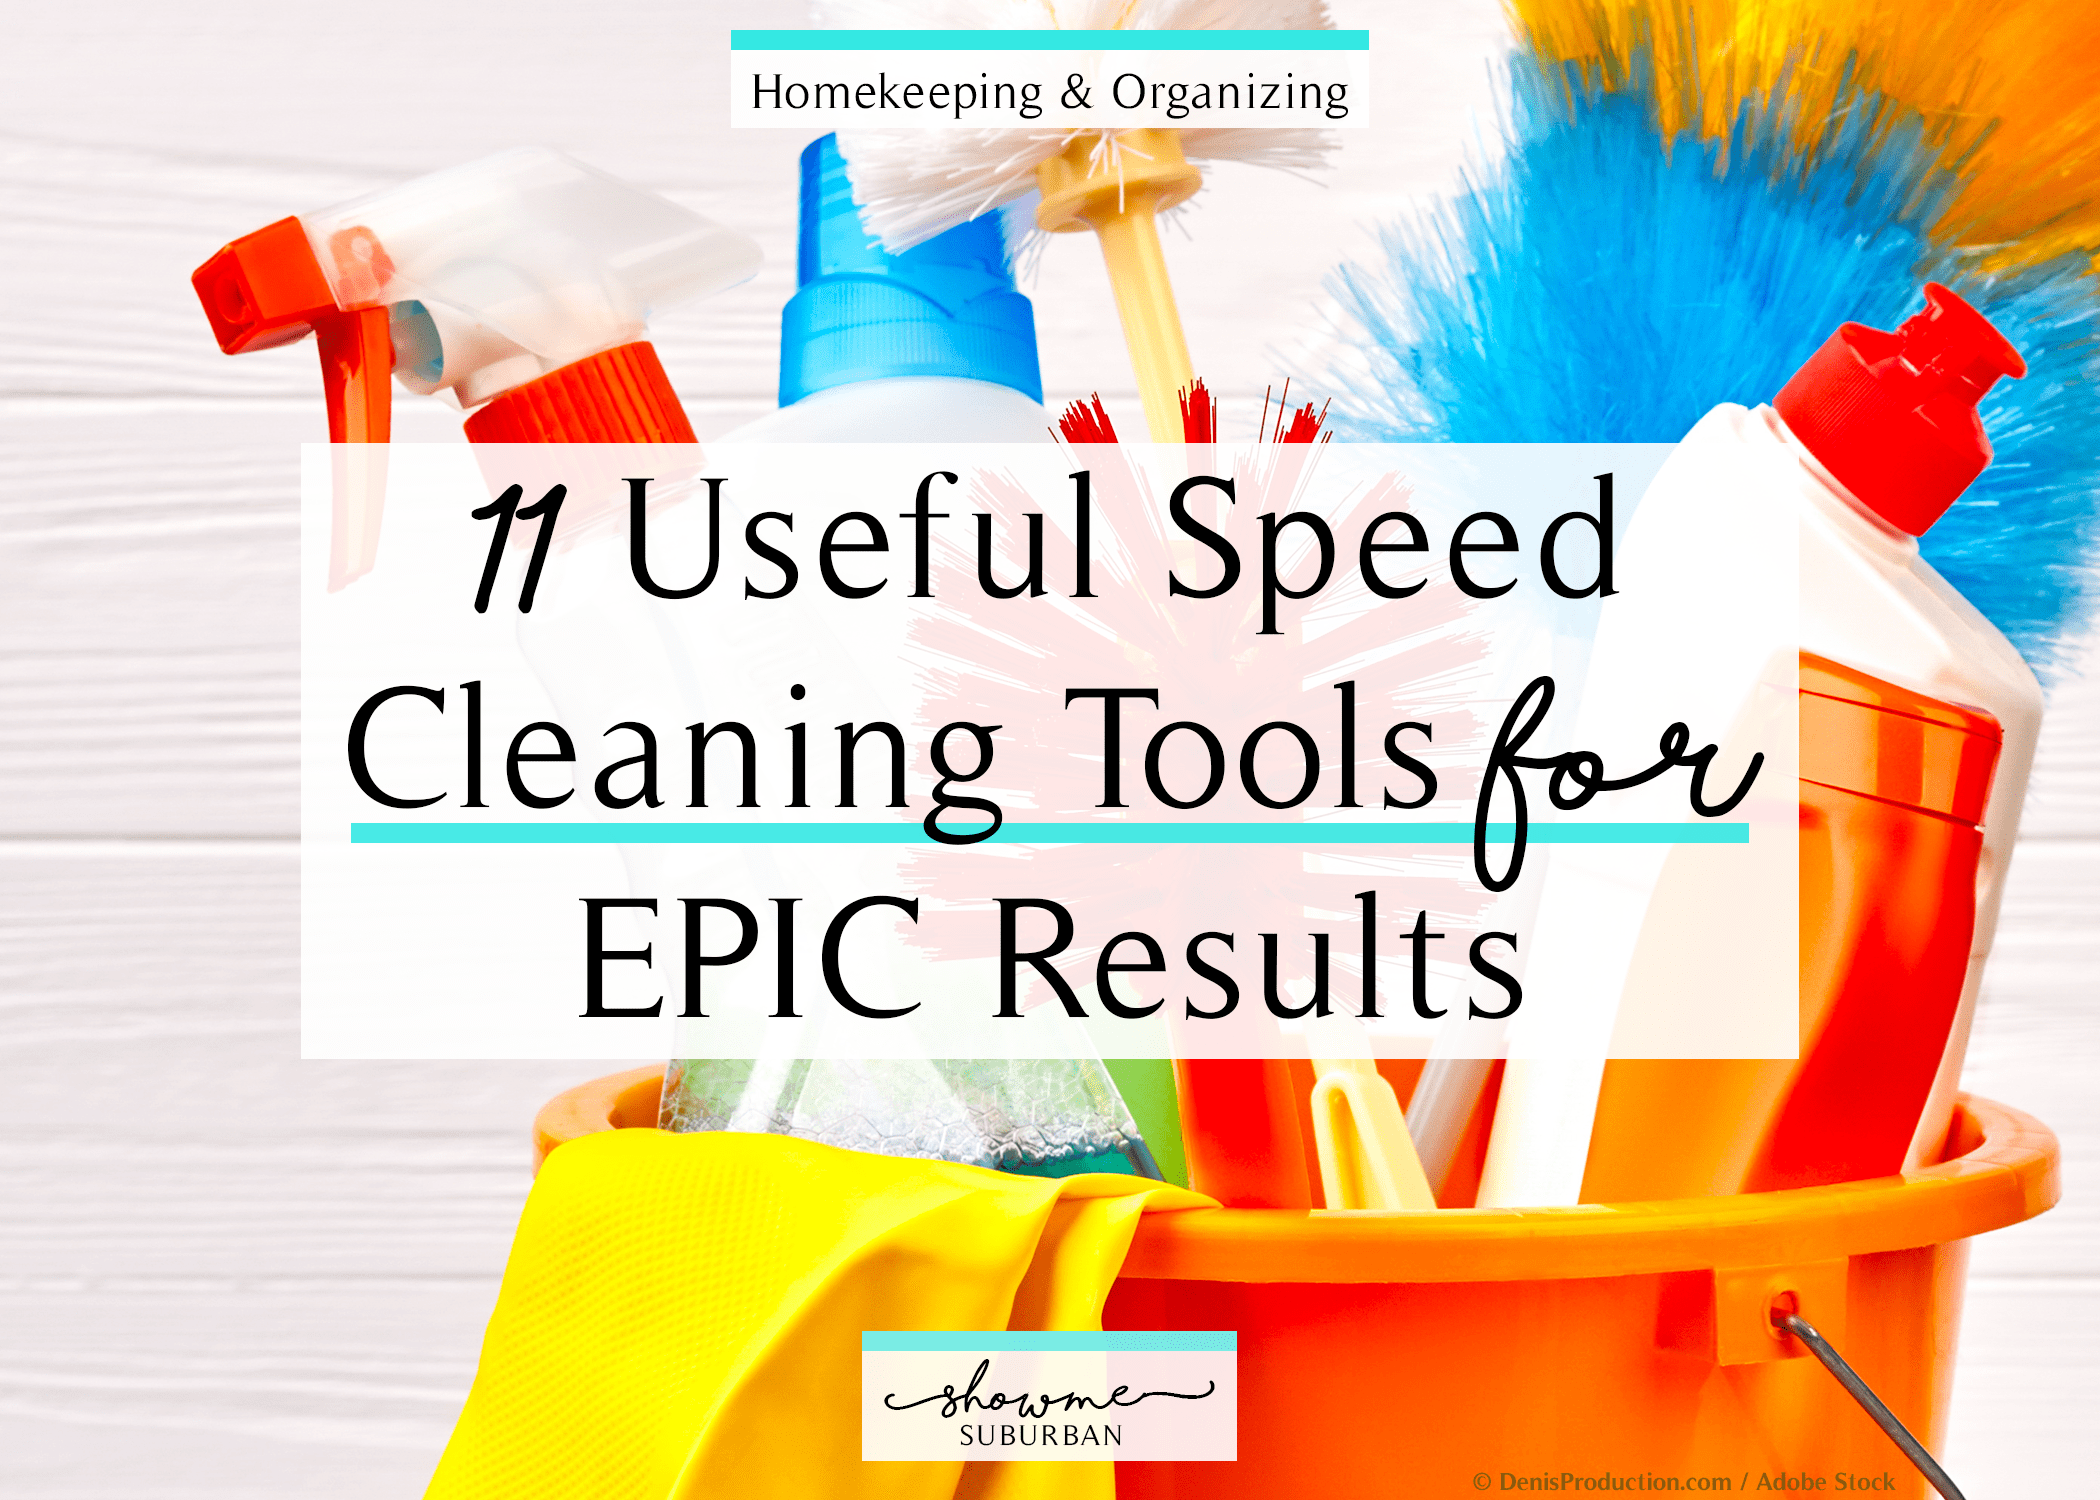 10 Speed Cleaning Tips that Save Time